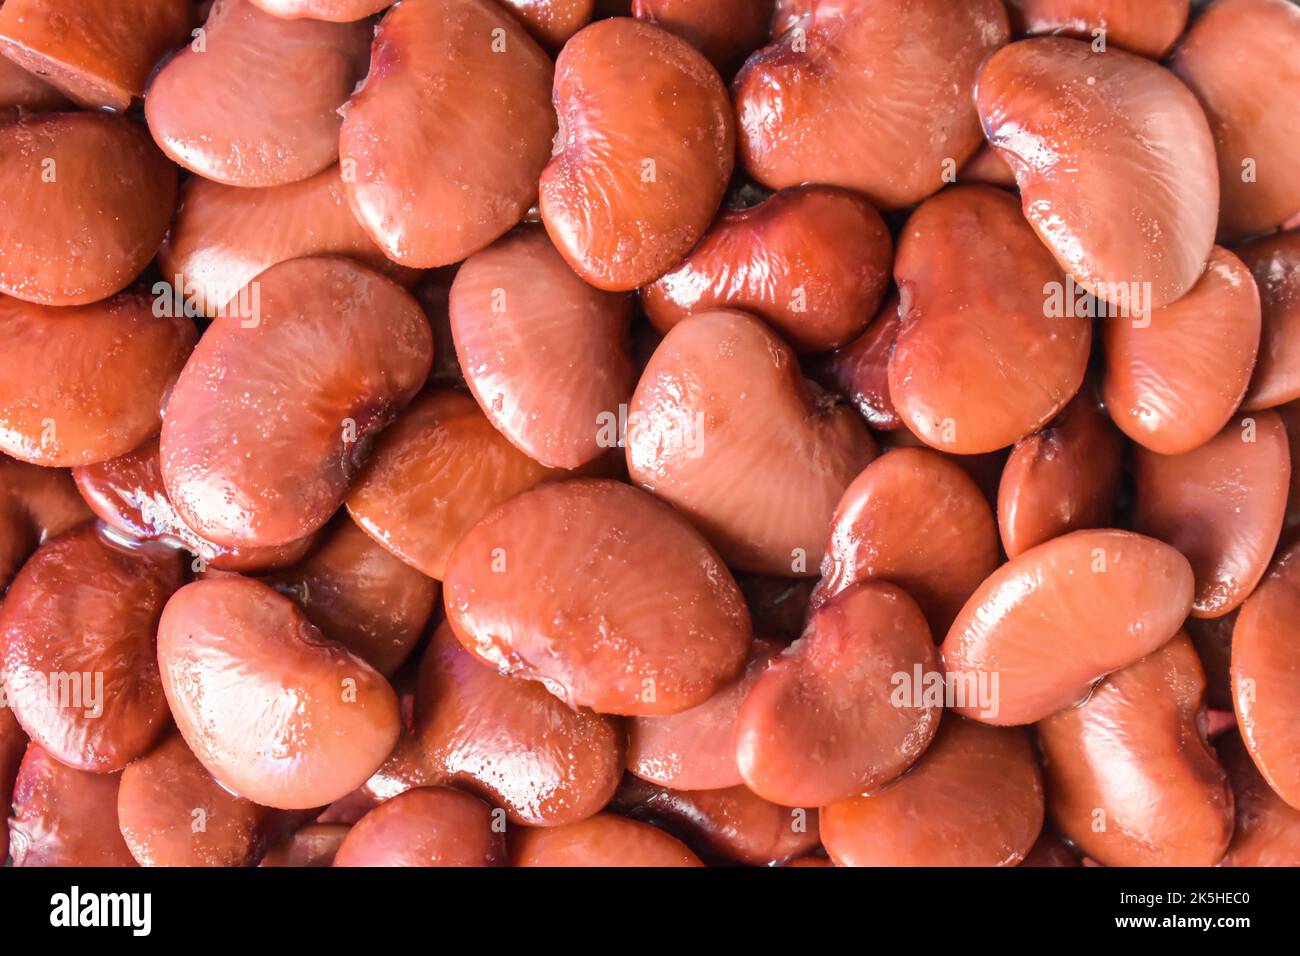 Red flat beans. Protein rich food. Healthy diet. Closeup view. Stock Photo